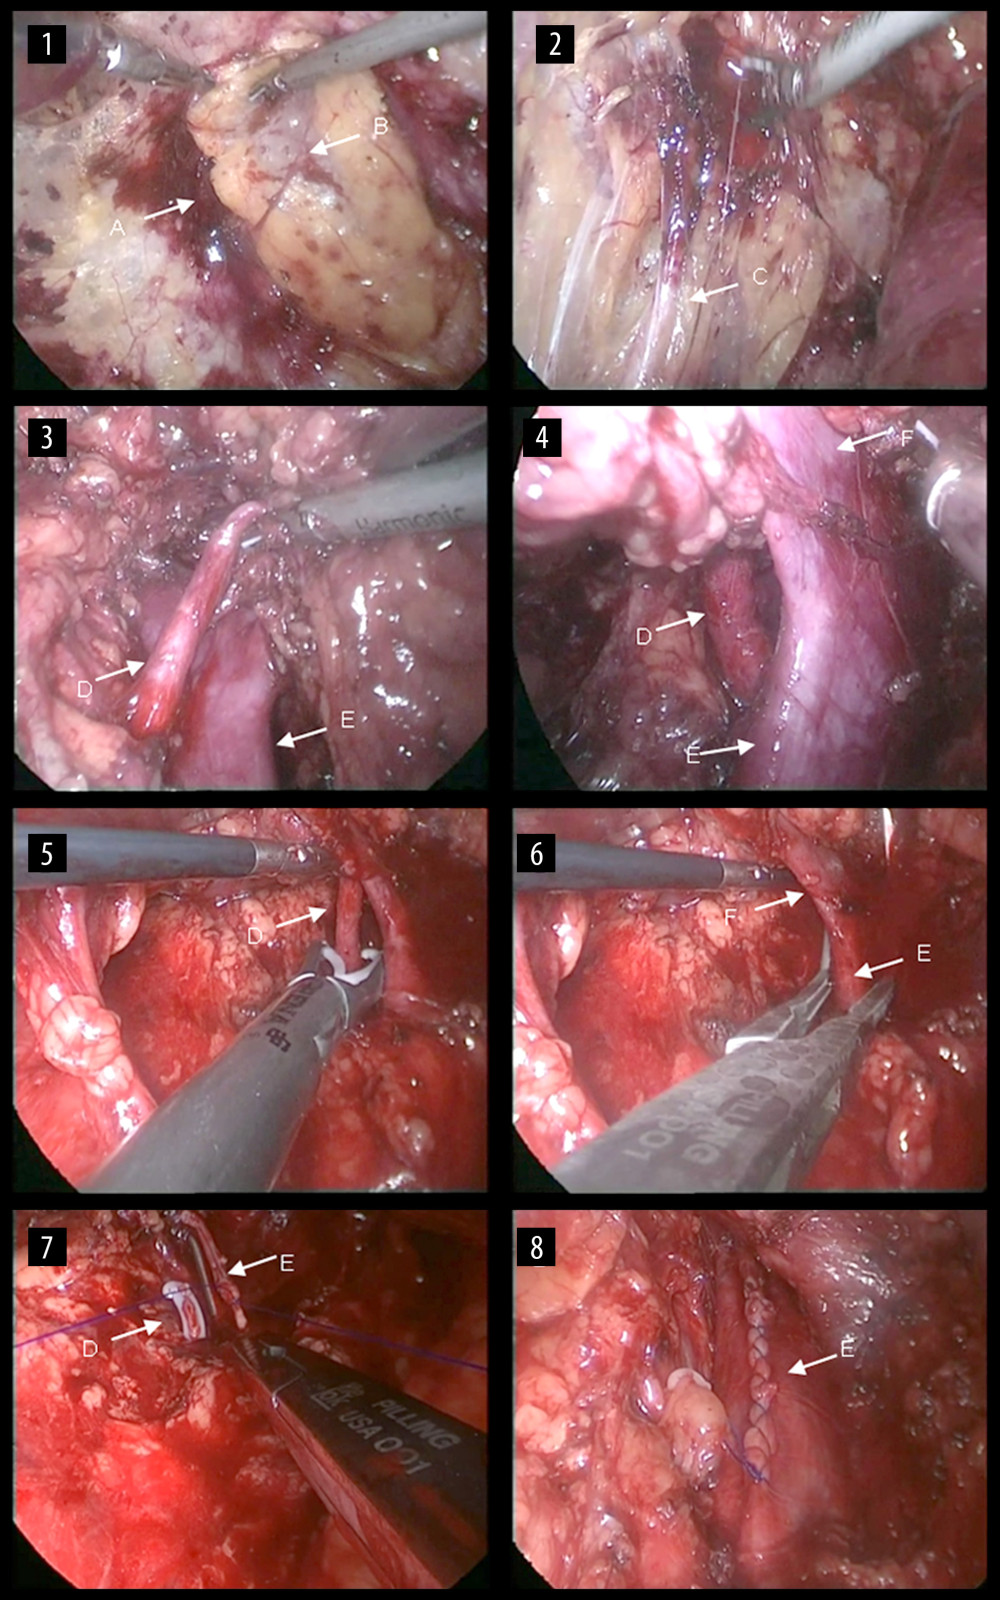 Surgical steps of right retroperitoneal laparoscopic live donor. nephrectomy. The renal fascia is opened (1), the ureter is fully dissociated (2), and then the right renal artery is dissected (3). The renal vein and the inferior vena cava are carefully dissected at their confluence (4). Then, the renal artery is clipped proximally (5), the renal vein is blocked at the confluence of the renal vein at the inferior vena cava and the renal vein is cut along with partial vena cava wall (6). The incision on the lateral wall of the inferior vena cava is then continuously sutured (7) and the vena cava after suturing is shown (8). A: the renal fascia; B: the right kidney; C: the ureter; D: the right renal artery; E: the inferior vena cava; F: the right renal vein.